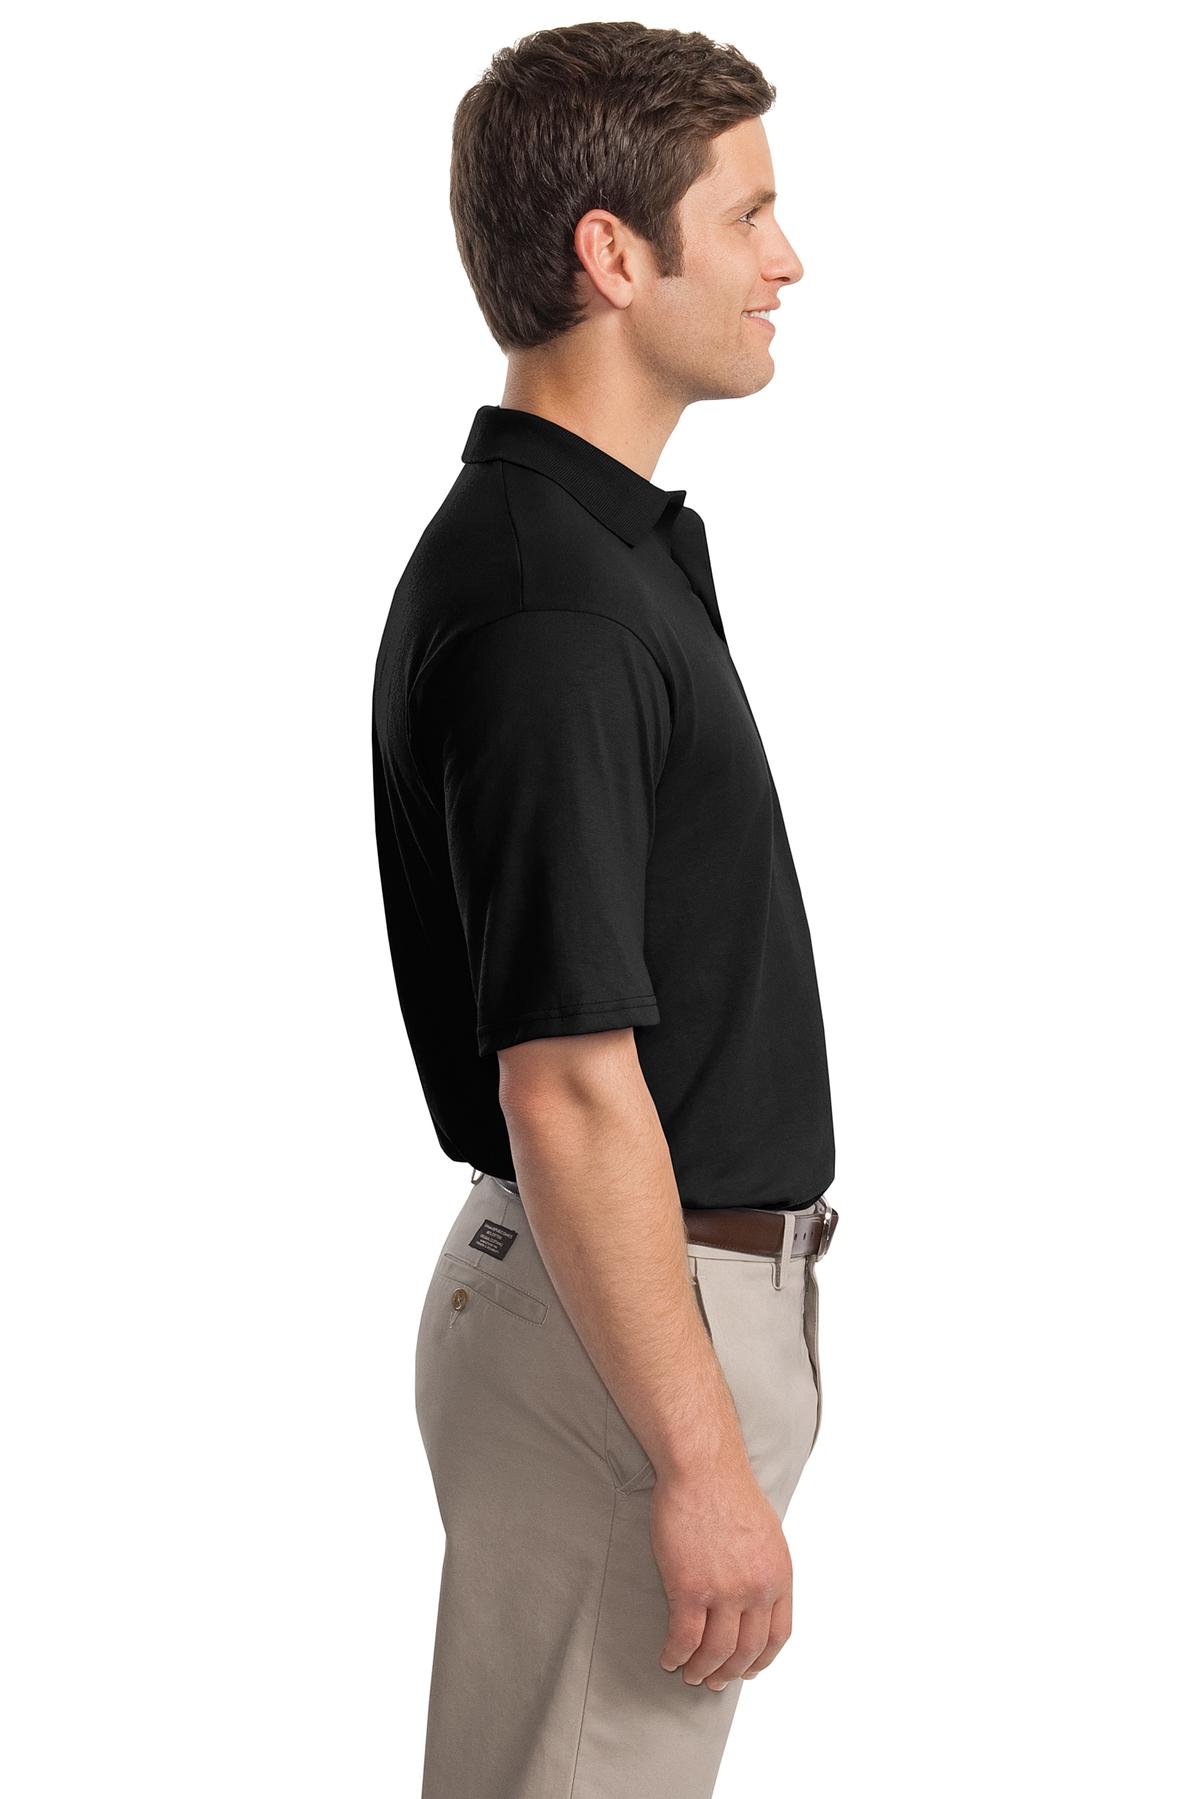 Jerzees Mens 50/50 Jersey Pocket Polo with SpotShield (436P)